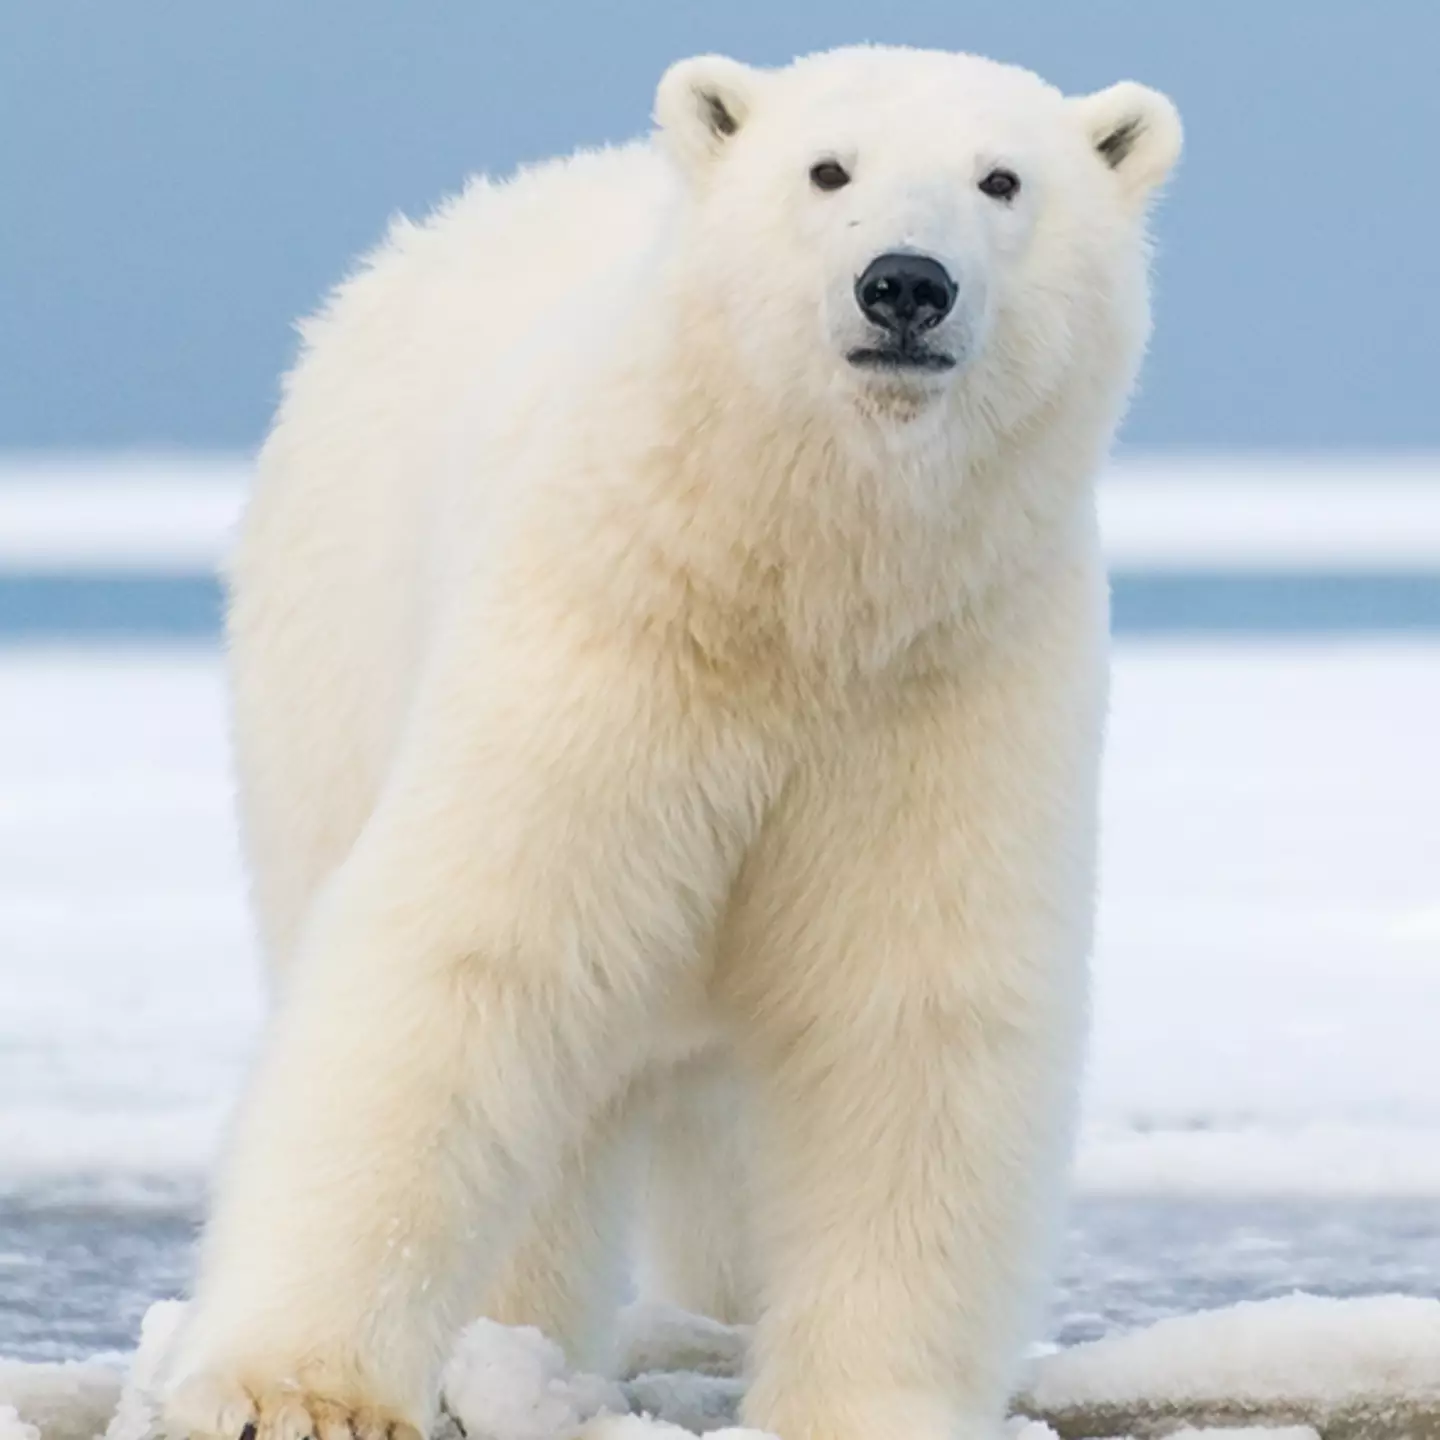 Cameras strapped to polar bears reveal heartbreaking tragedy in the melting Arctic